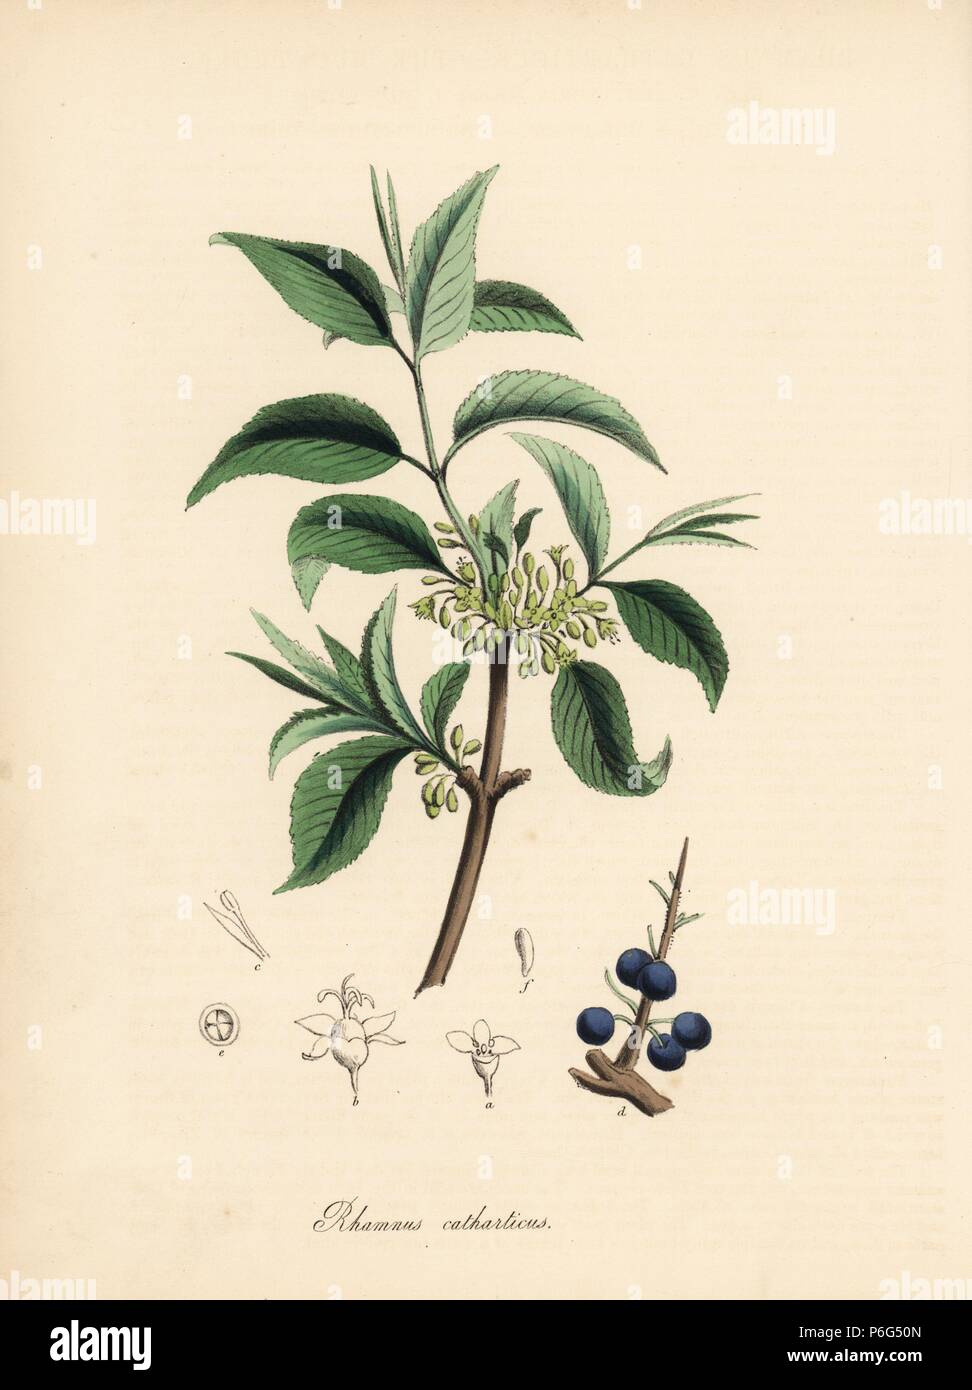 Purging buckthorn, Rhamnus cathartica (Buckthorn tree, Rhamnus catharticus), with leaf, berry, seed and branch. After an illustration by G. Reid in Churchill and Stephenson's 'Medical Botany.' Handcoloured zincograph by C. Chabot drawn by Miss M. A. Burnett from her 'Plantae Utiliores: or Illustrations of Useful Plants,' Whittaker, London, 1842. Miss Burnett drew the botanical illustrations, but the text was chiefly by her late brother, British botanist Gilbert Thomas Burnett (1800-1835). Stock Photo